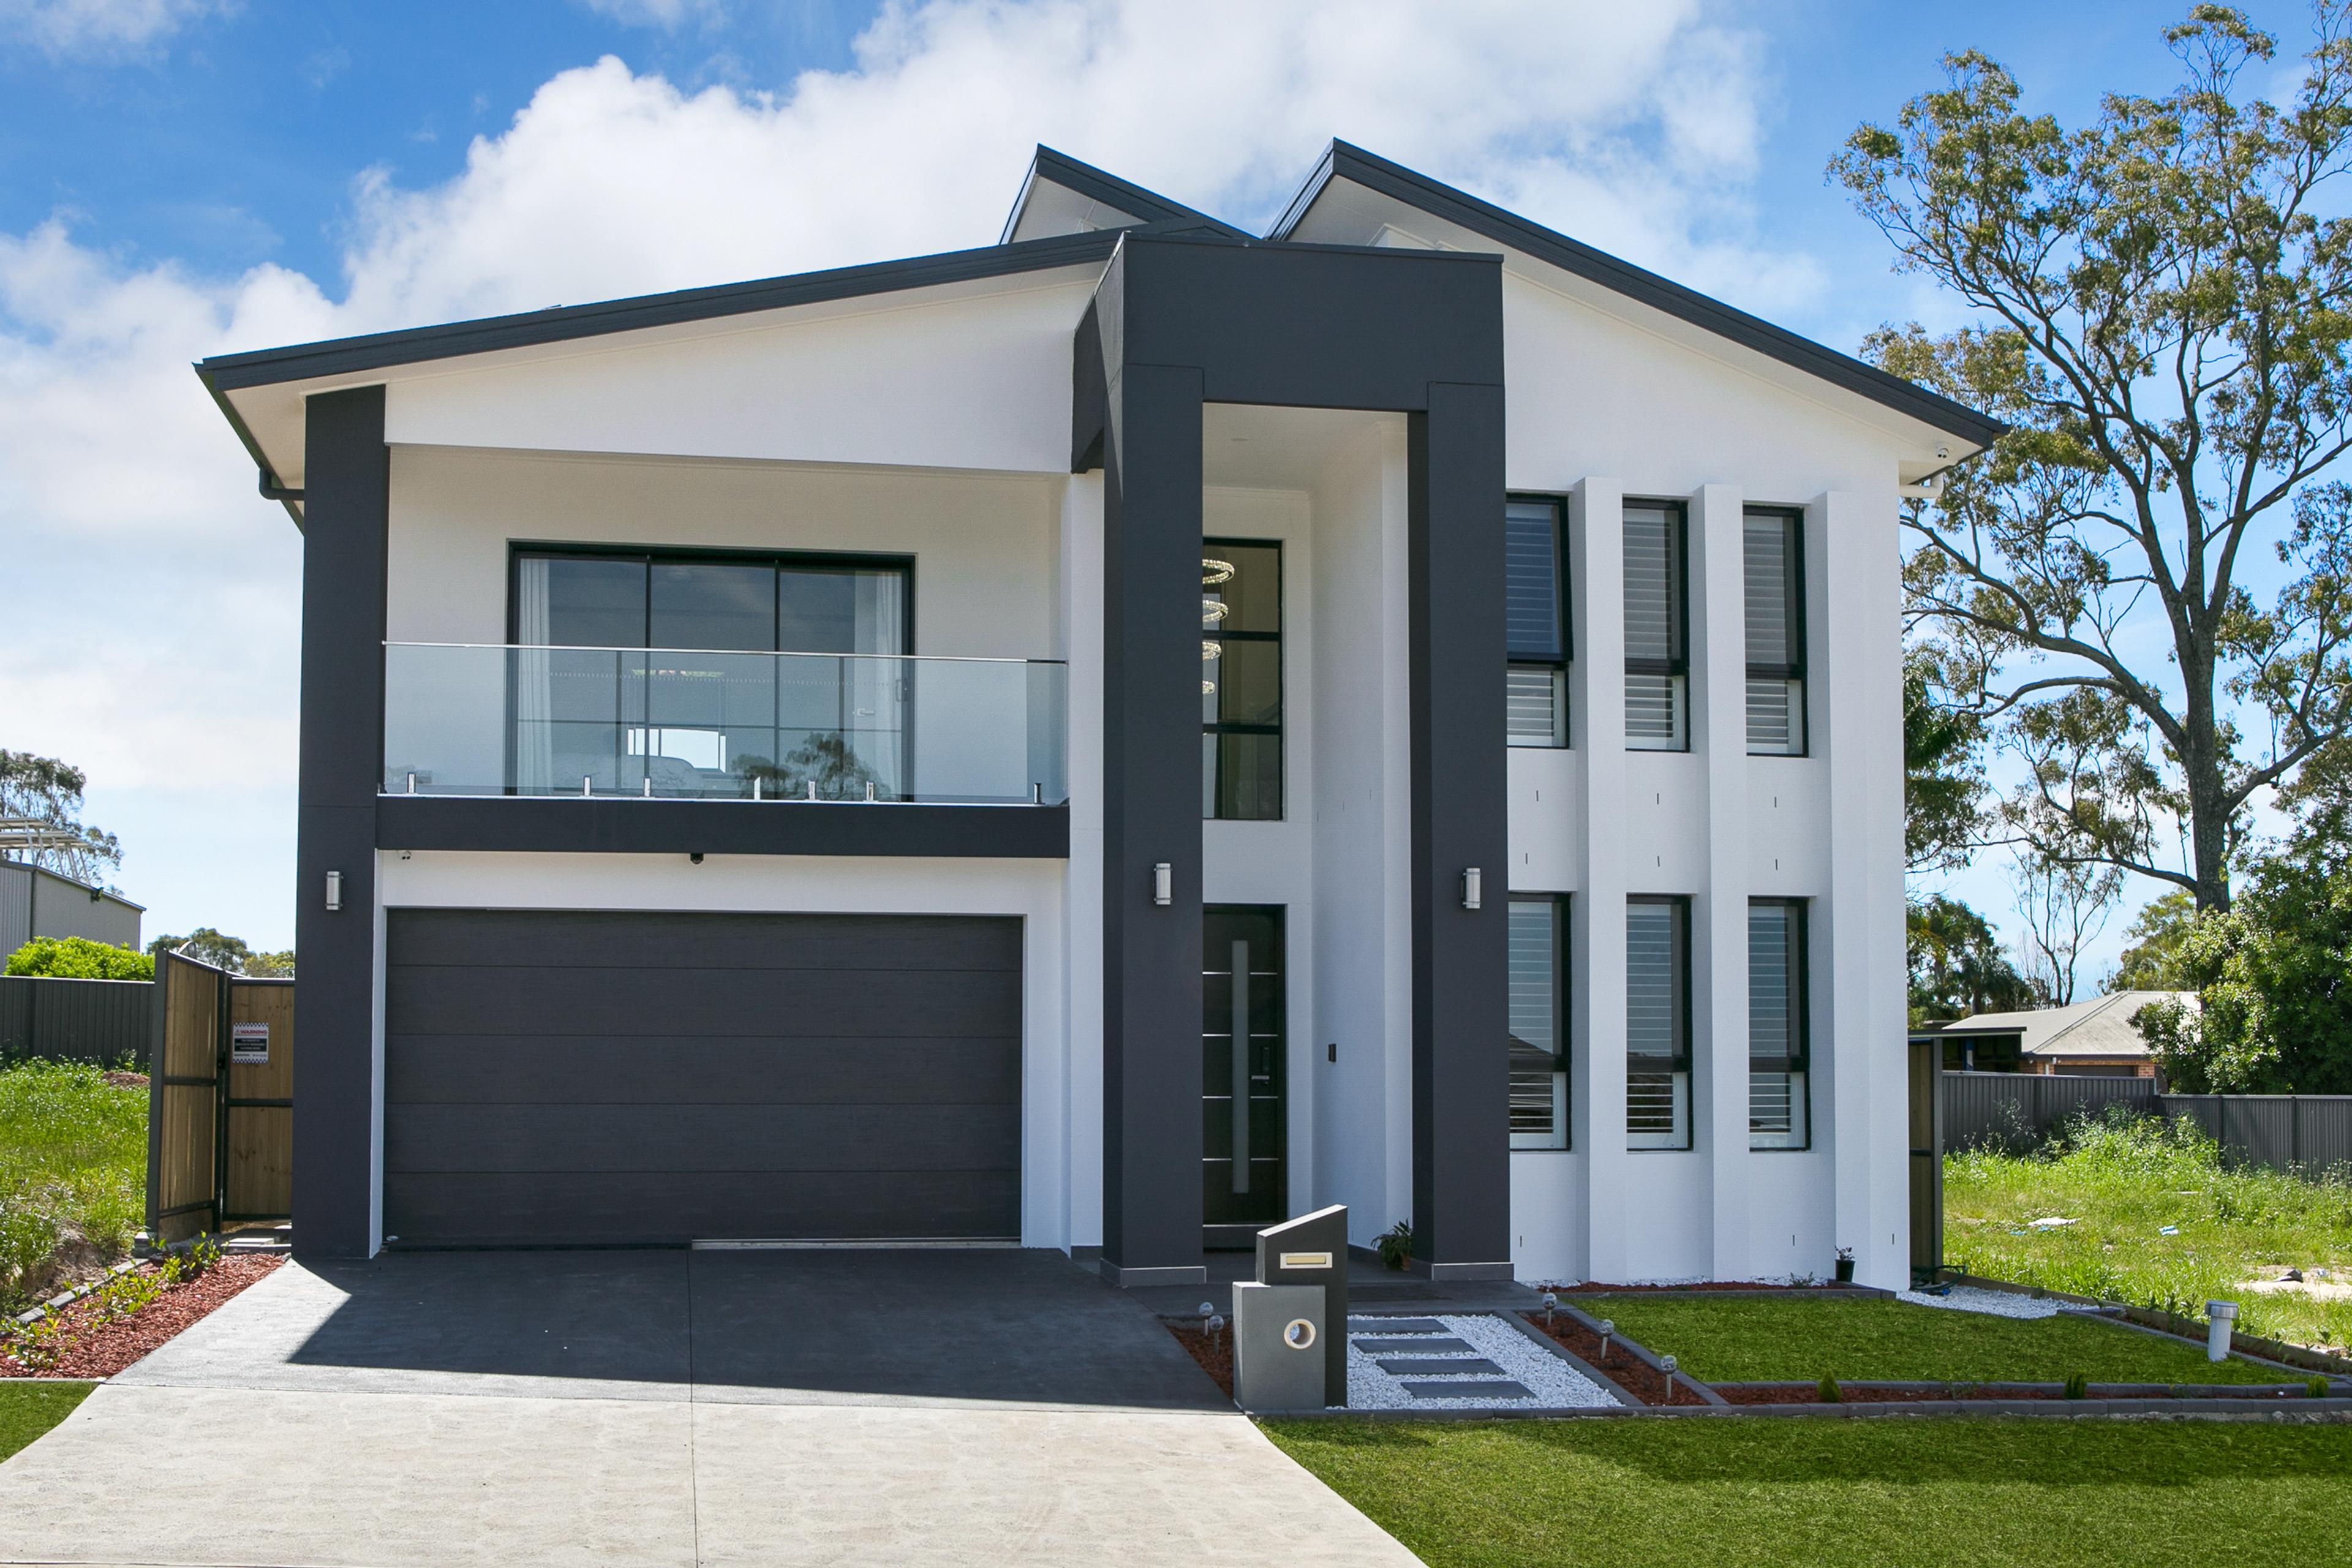 Dezire Homes build, modern custom facade with unique features